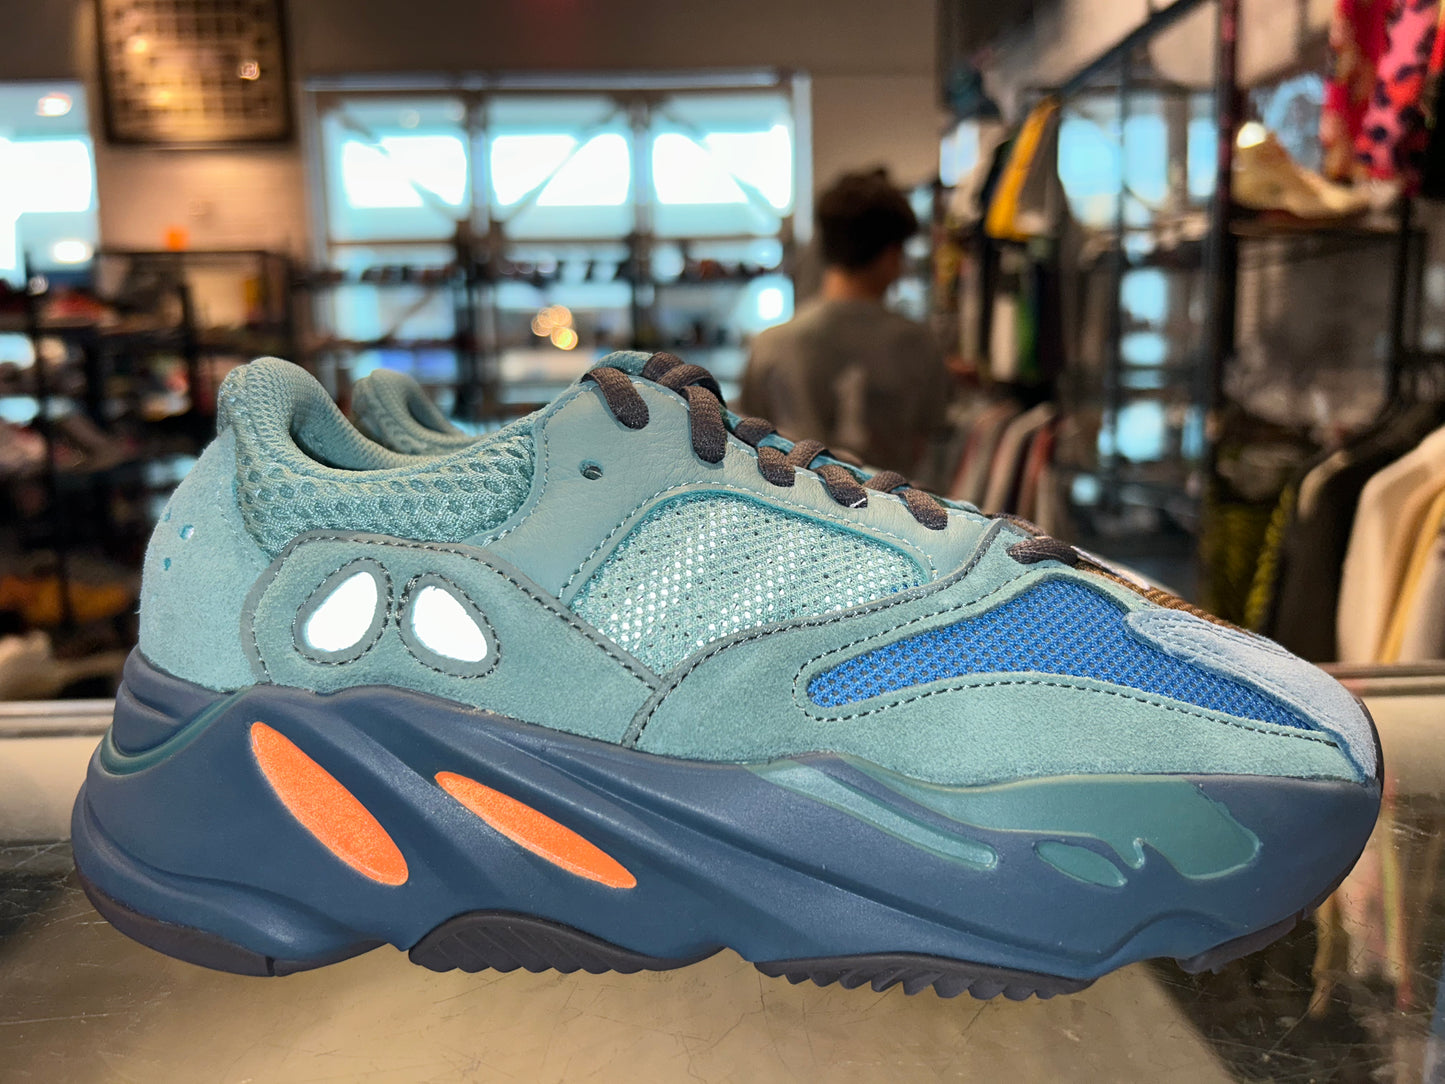 Size 4.5 Adidas Yeezy Boost 700 “Faded Azure” Brand New (Mall)